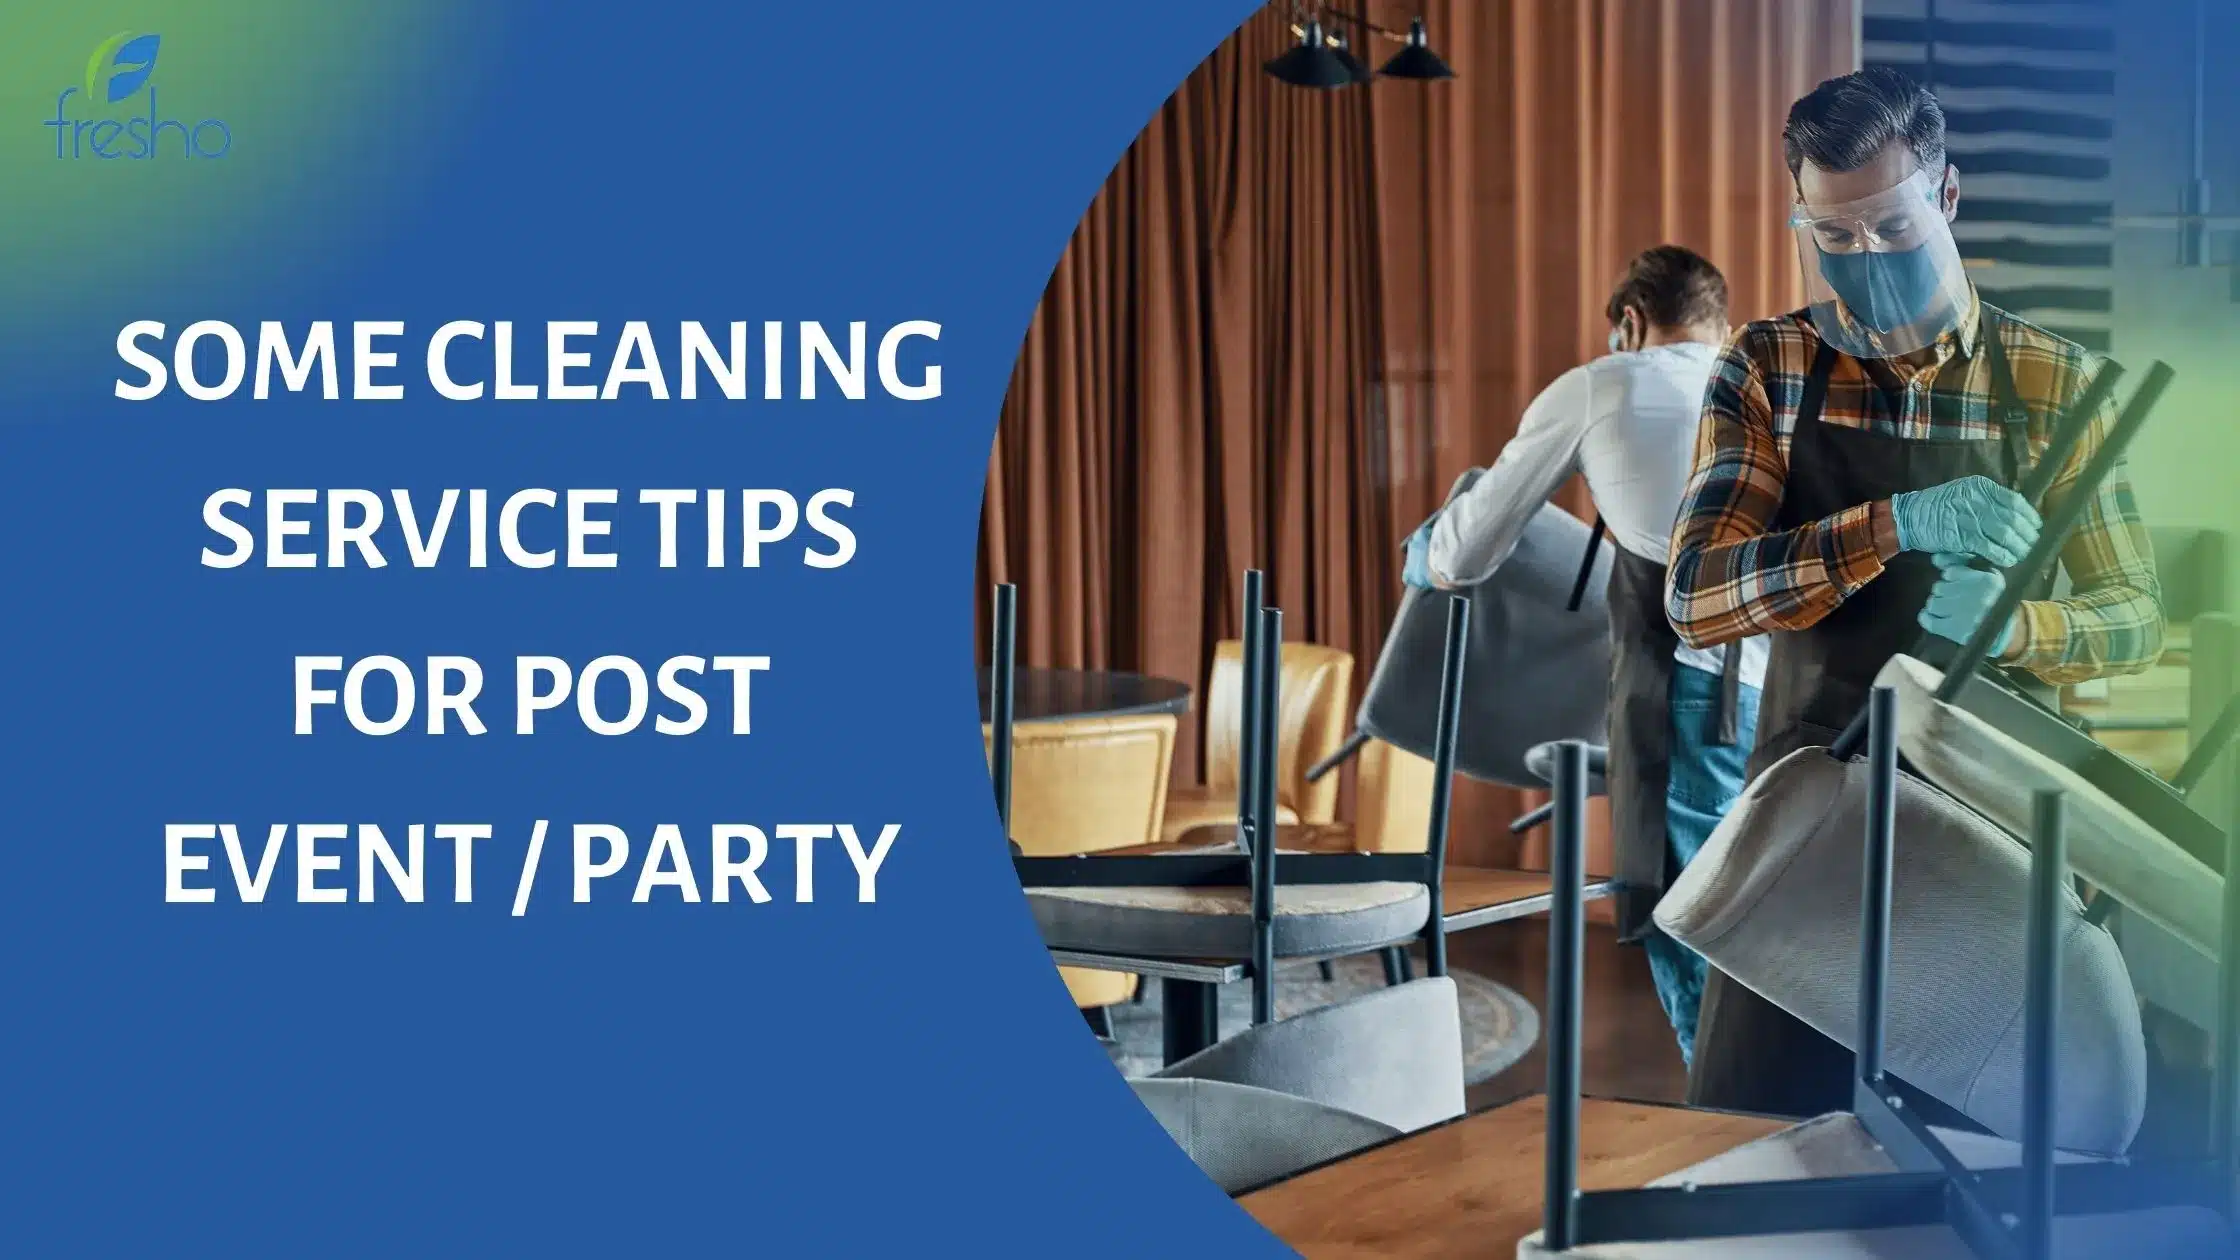 Some Cleaning Service Tips for Post Event or Party